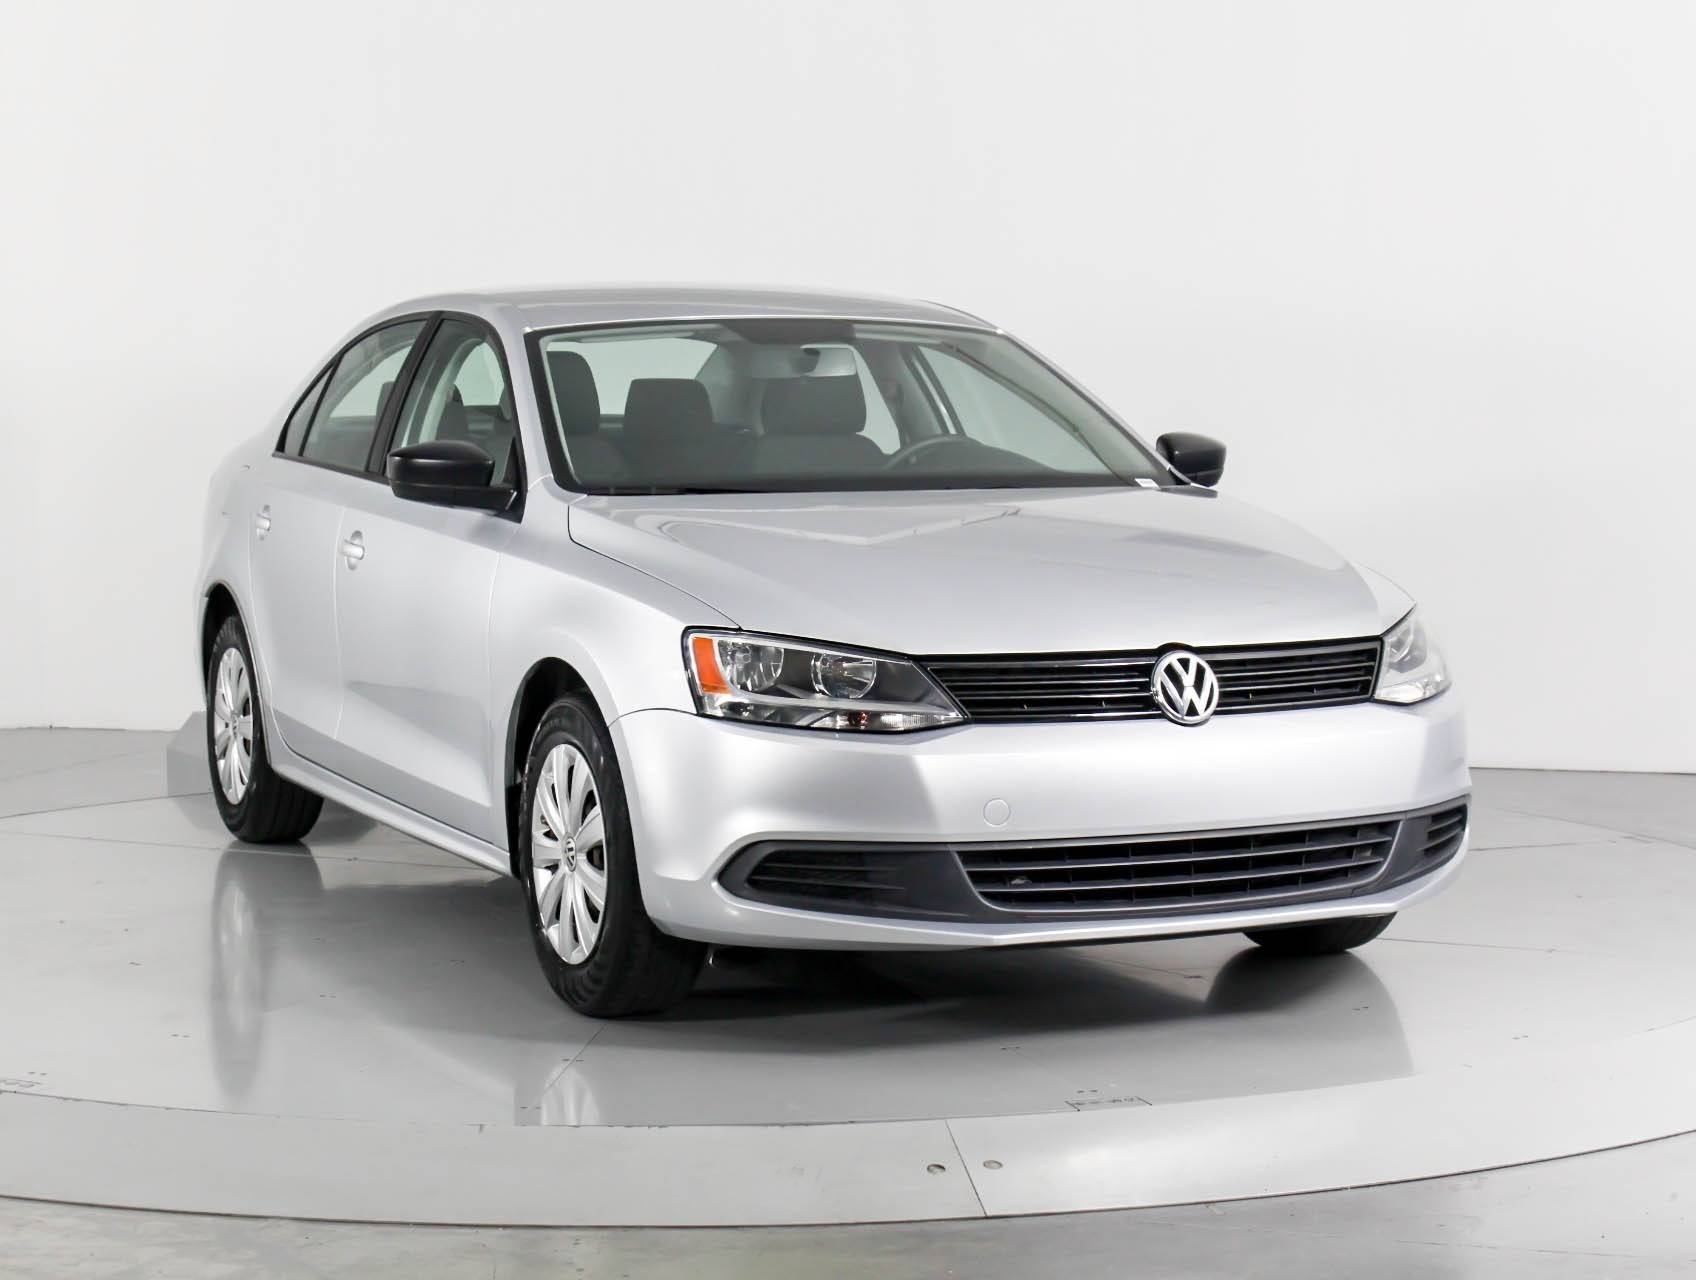 Florida Fine Cars - Used VOLKSWAGEN JETTA 2014 WEST PALM S